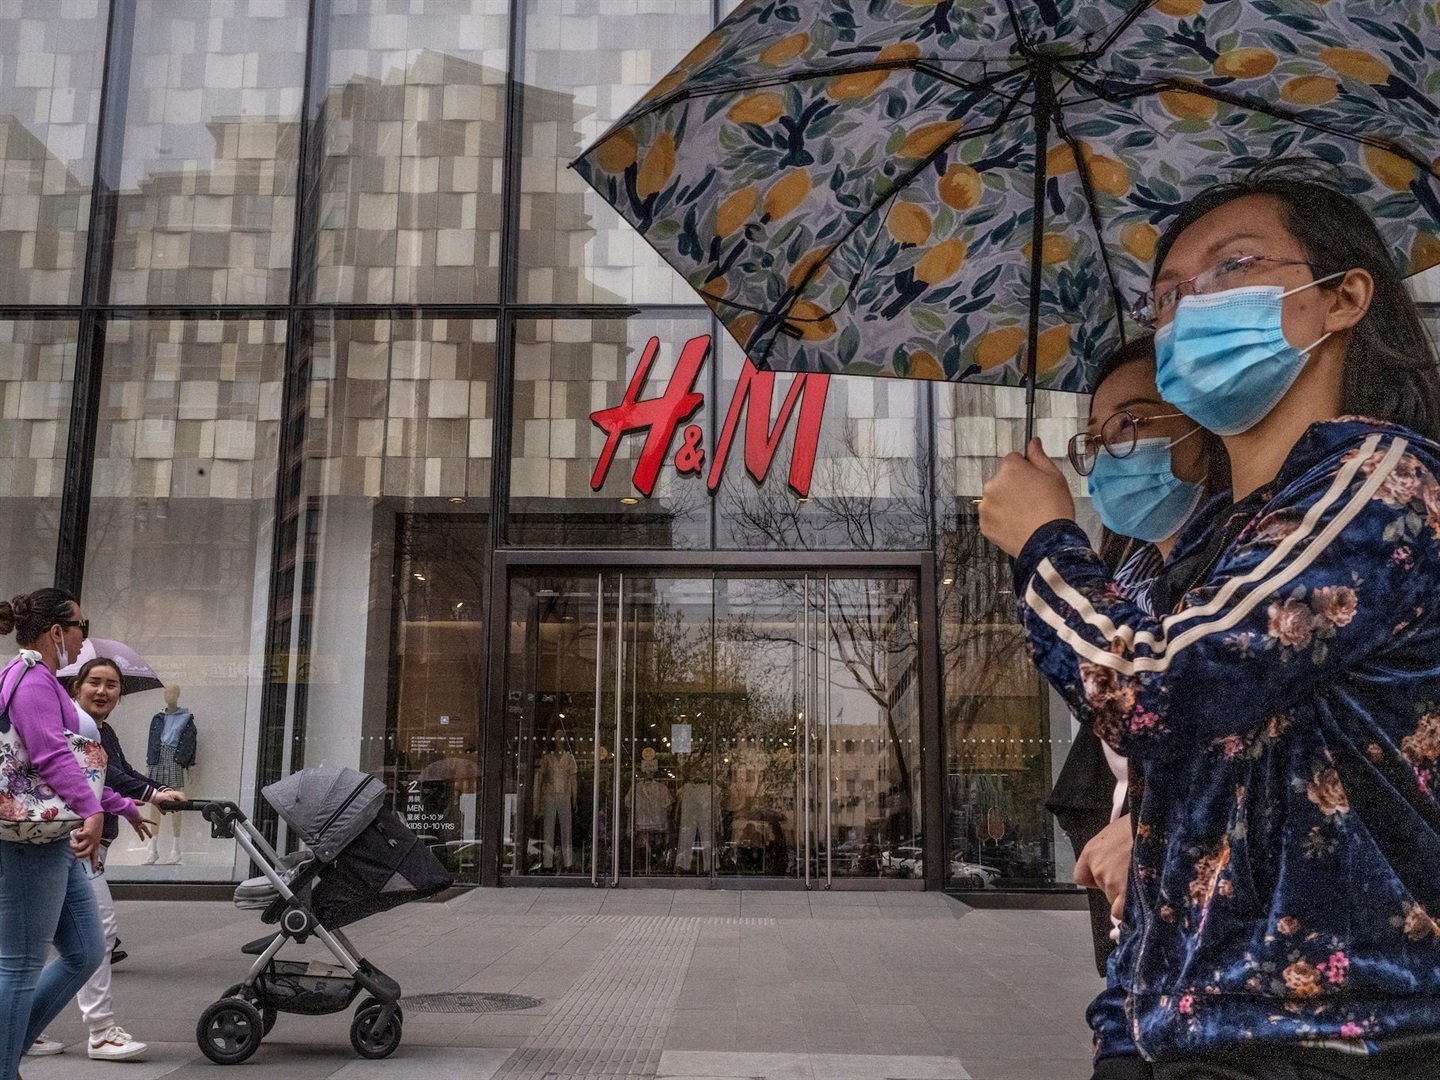 News24 | New H&M boss faces pricing dilemma in fight to win back customers